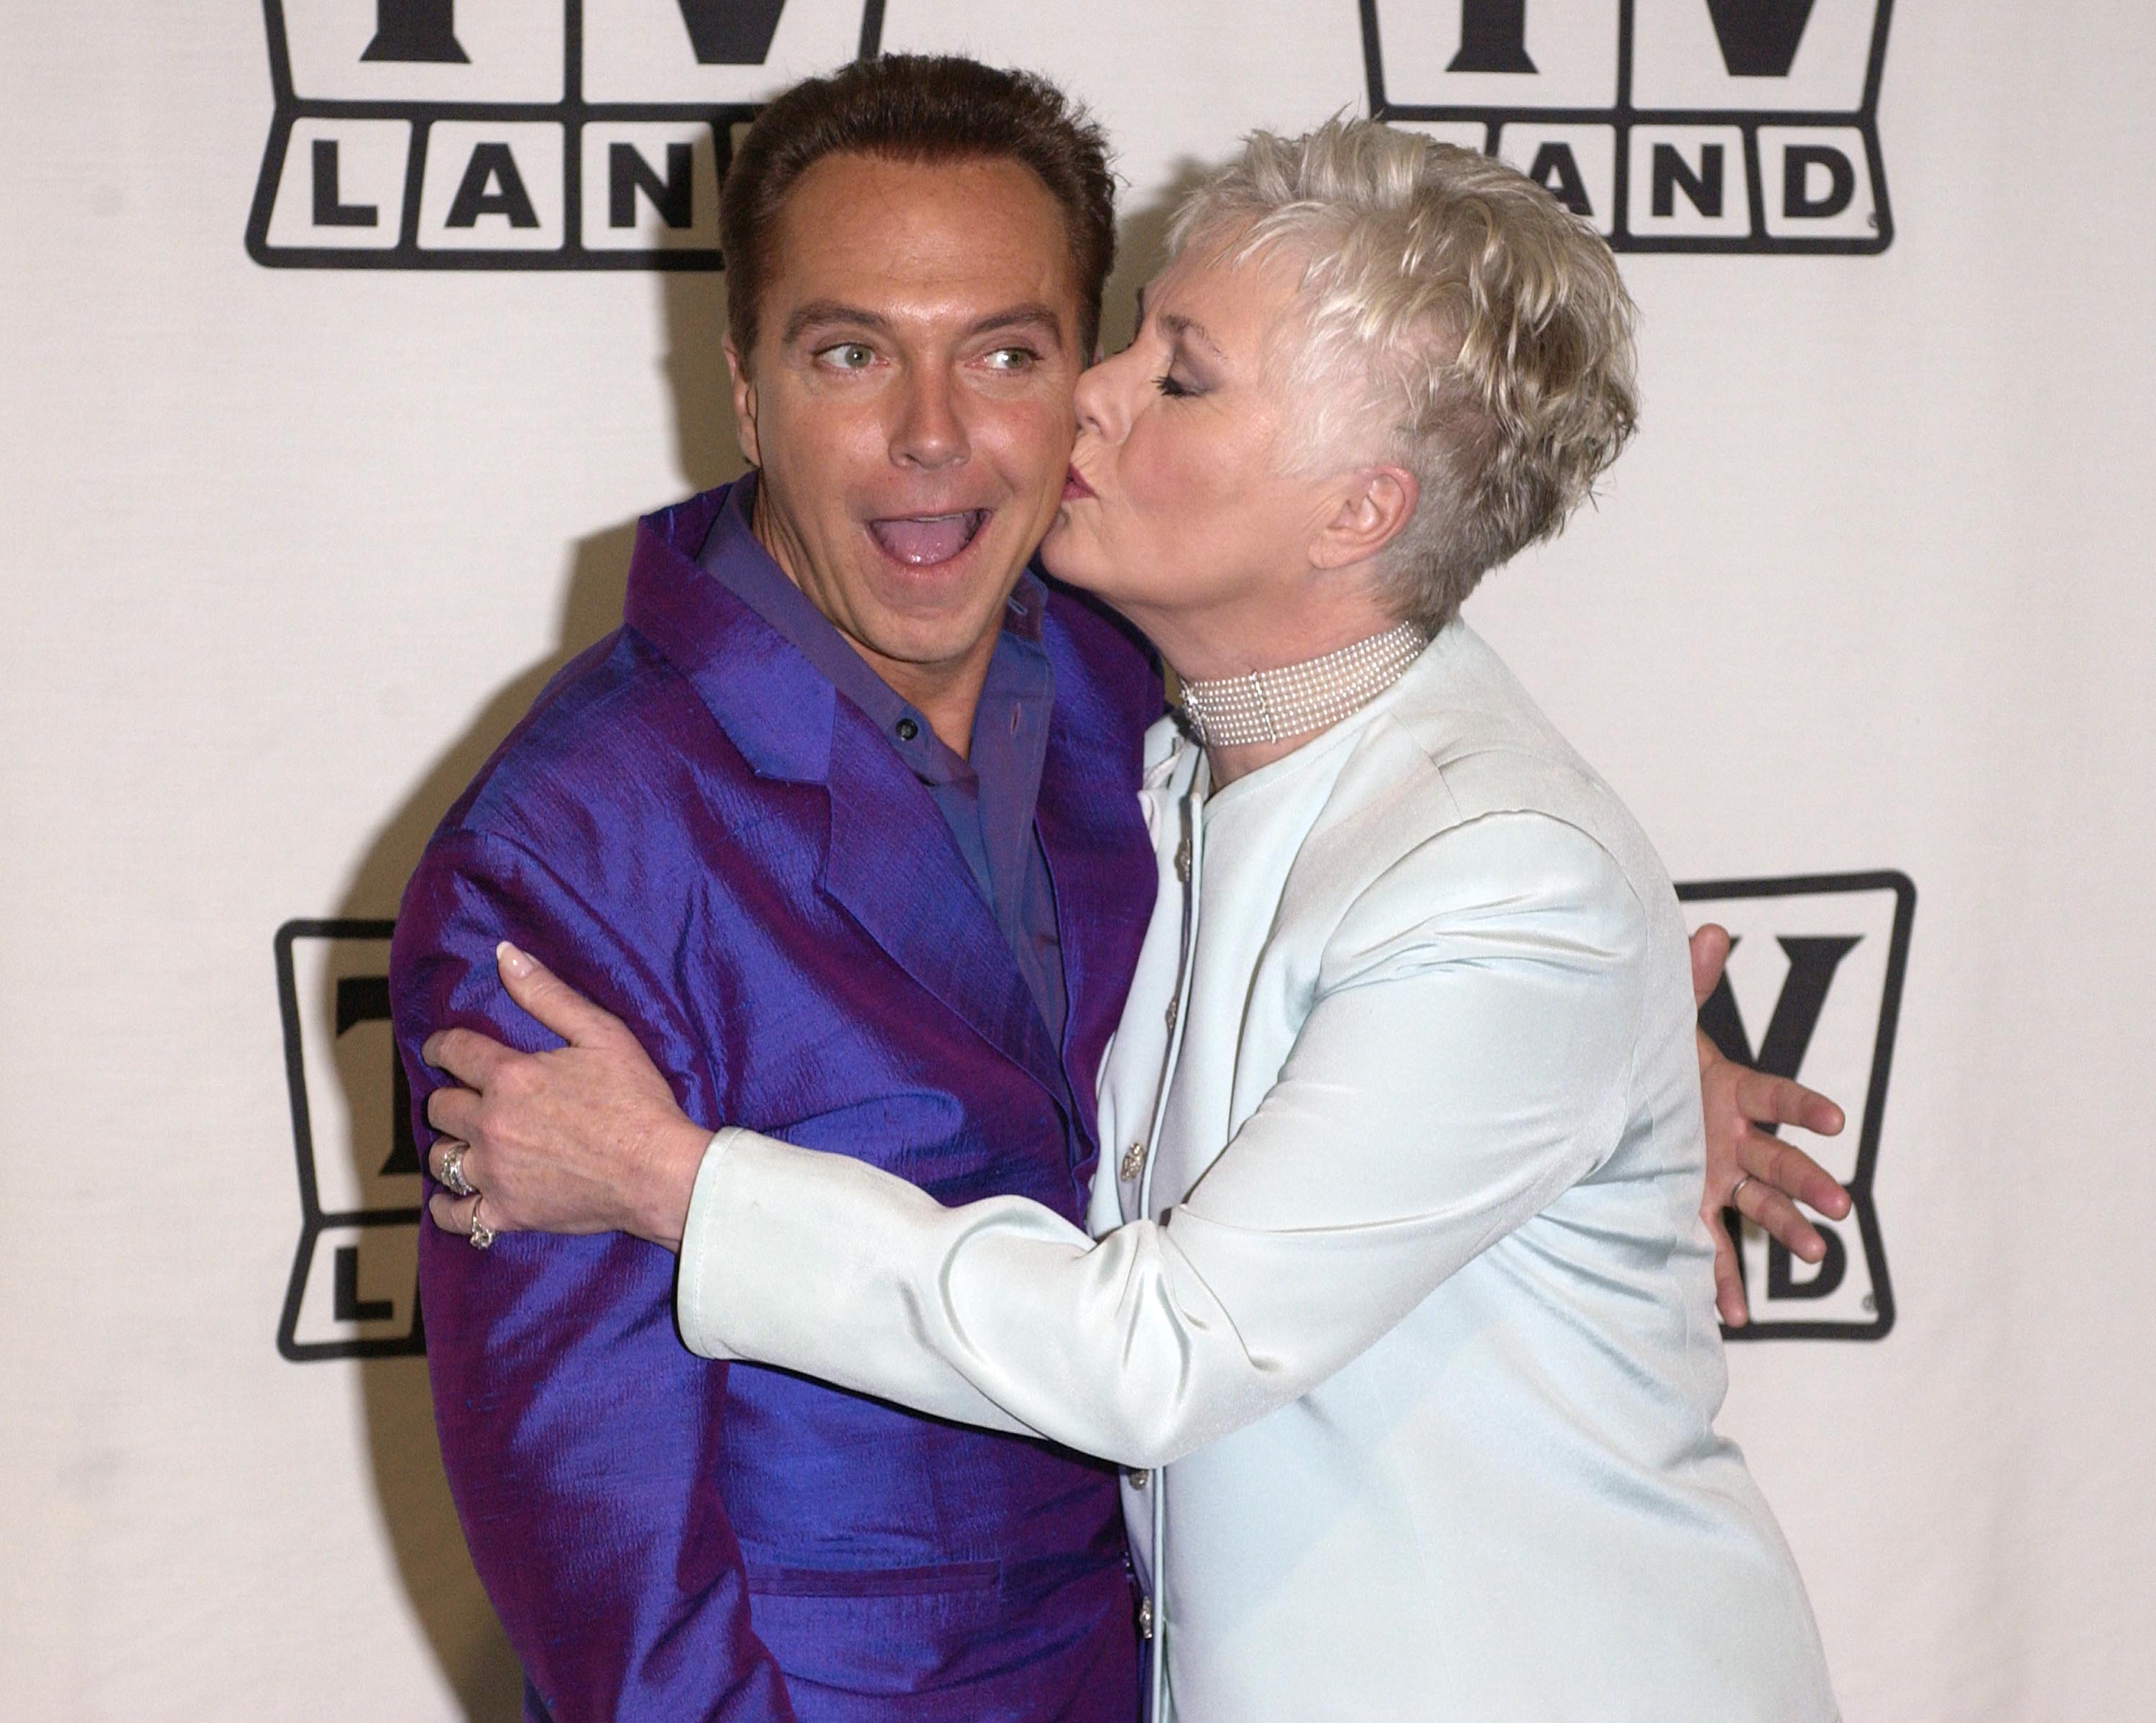 David Cassidy gets a kiss Shirley Jones backstage during the TV Land Awards 2003 at the Hollywood Palladium on March 2, 2003 in Hollywood, California. | Photo: Getty Images